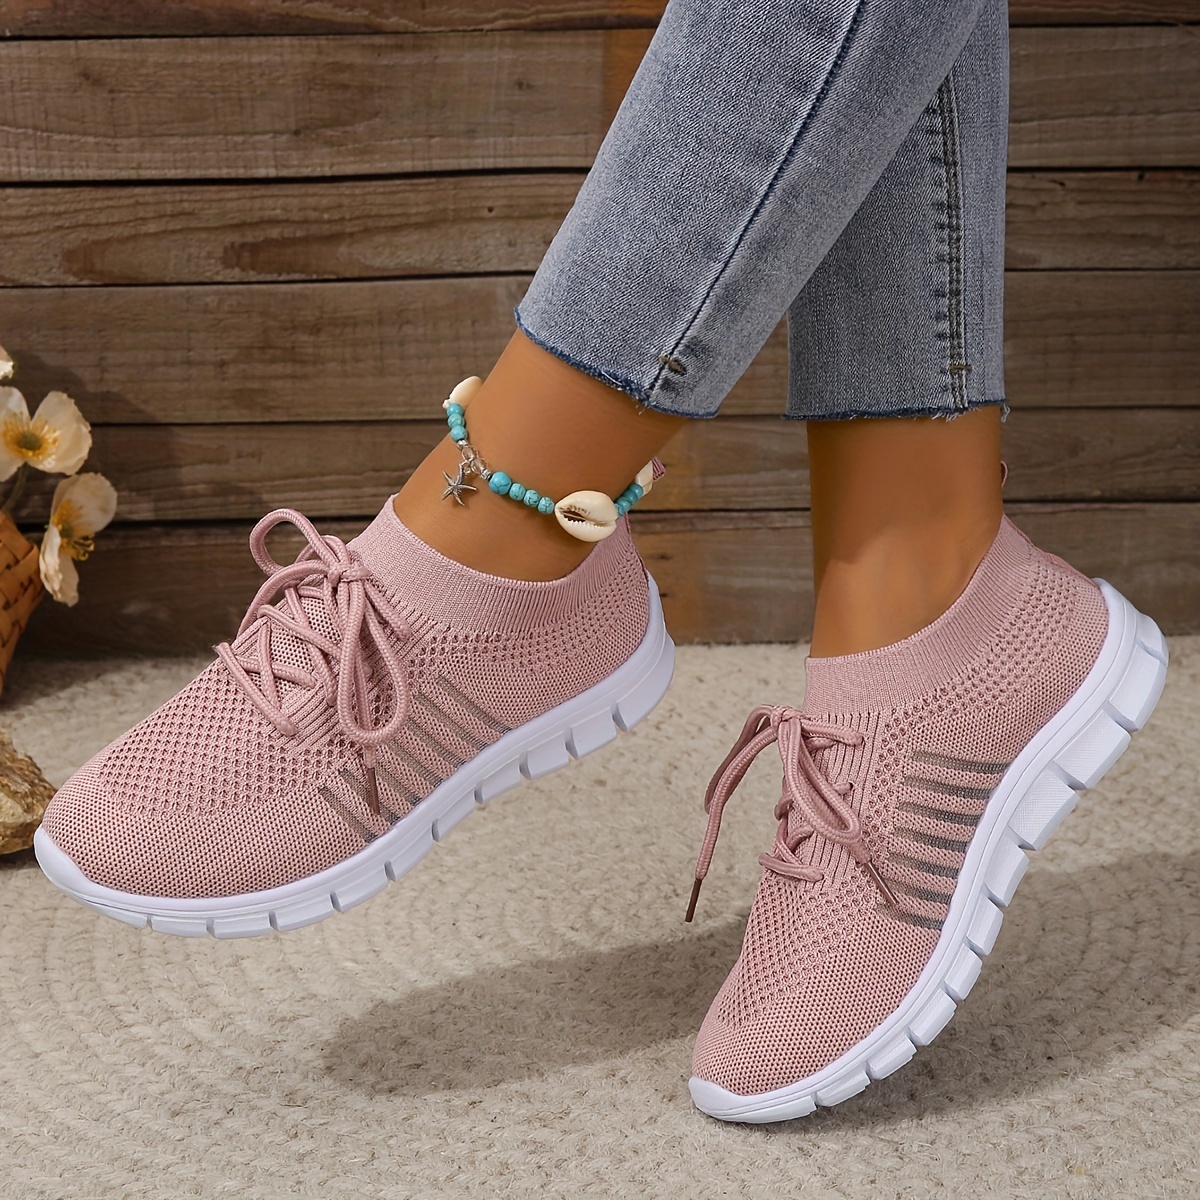 TOWED22 Womens Tennis Running Shoes Walking Shoes Lightweight Casual  Sneakers for Travel Gym Work(Pink,8.5)